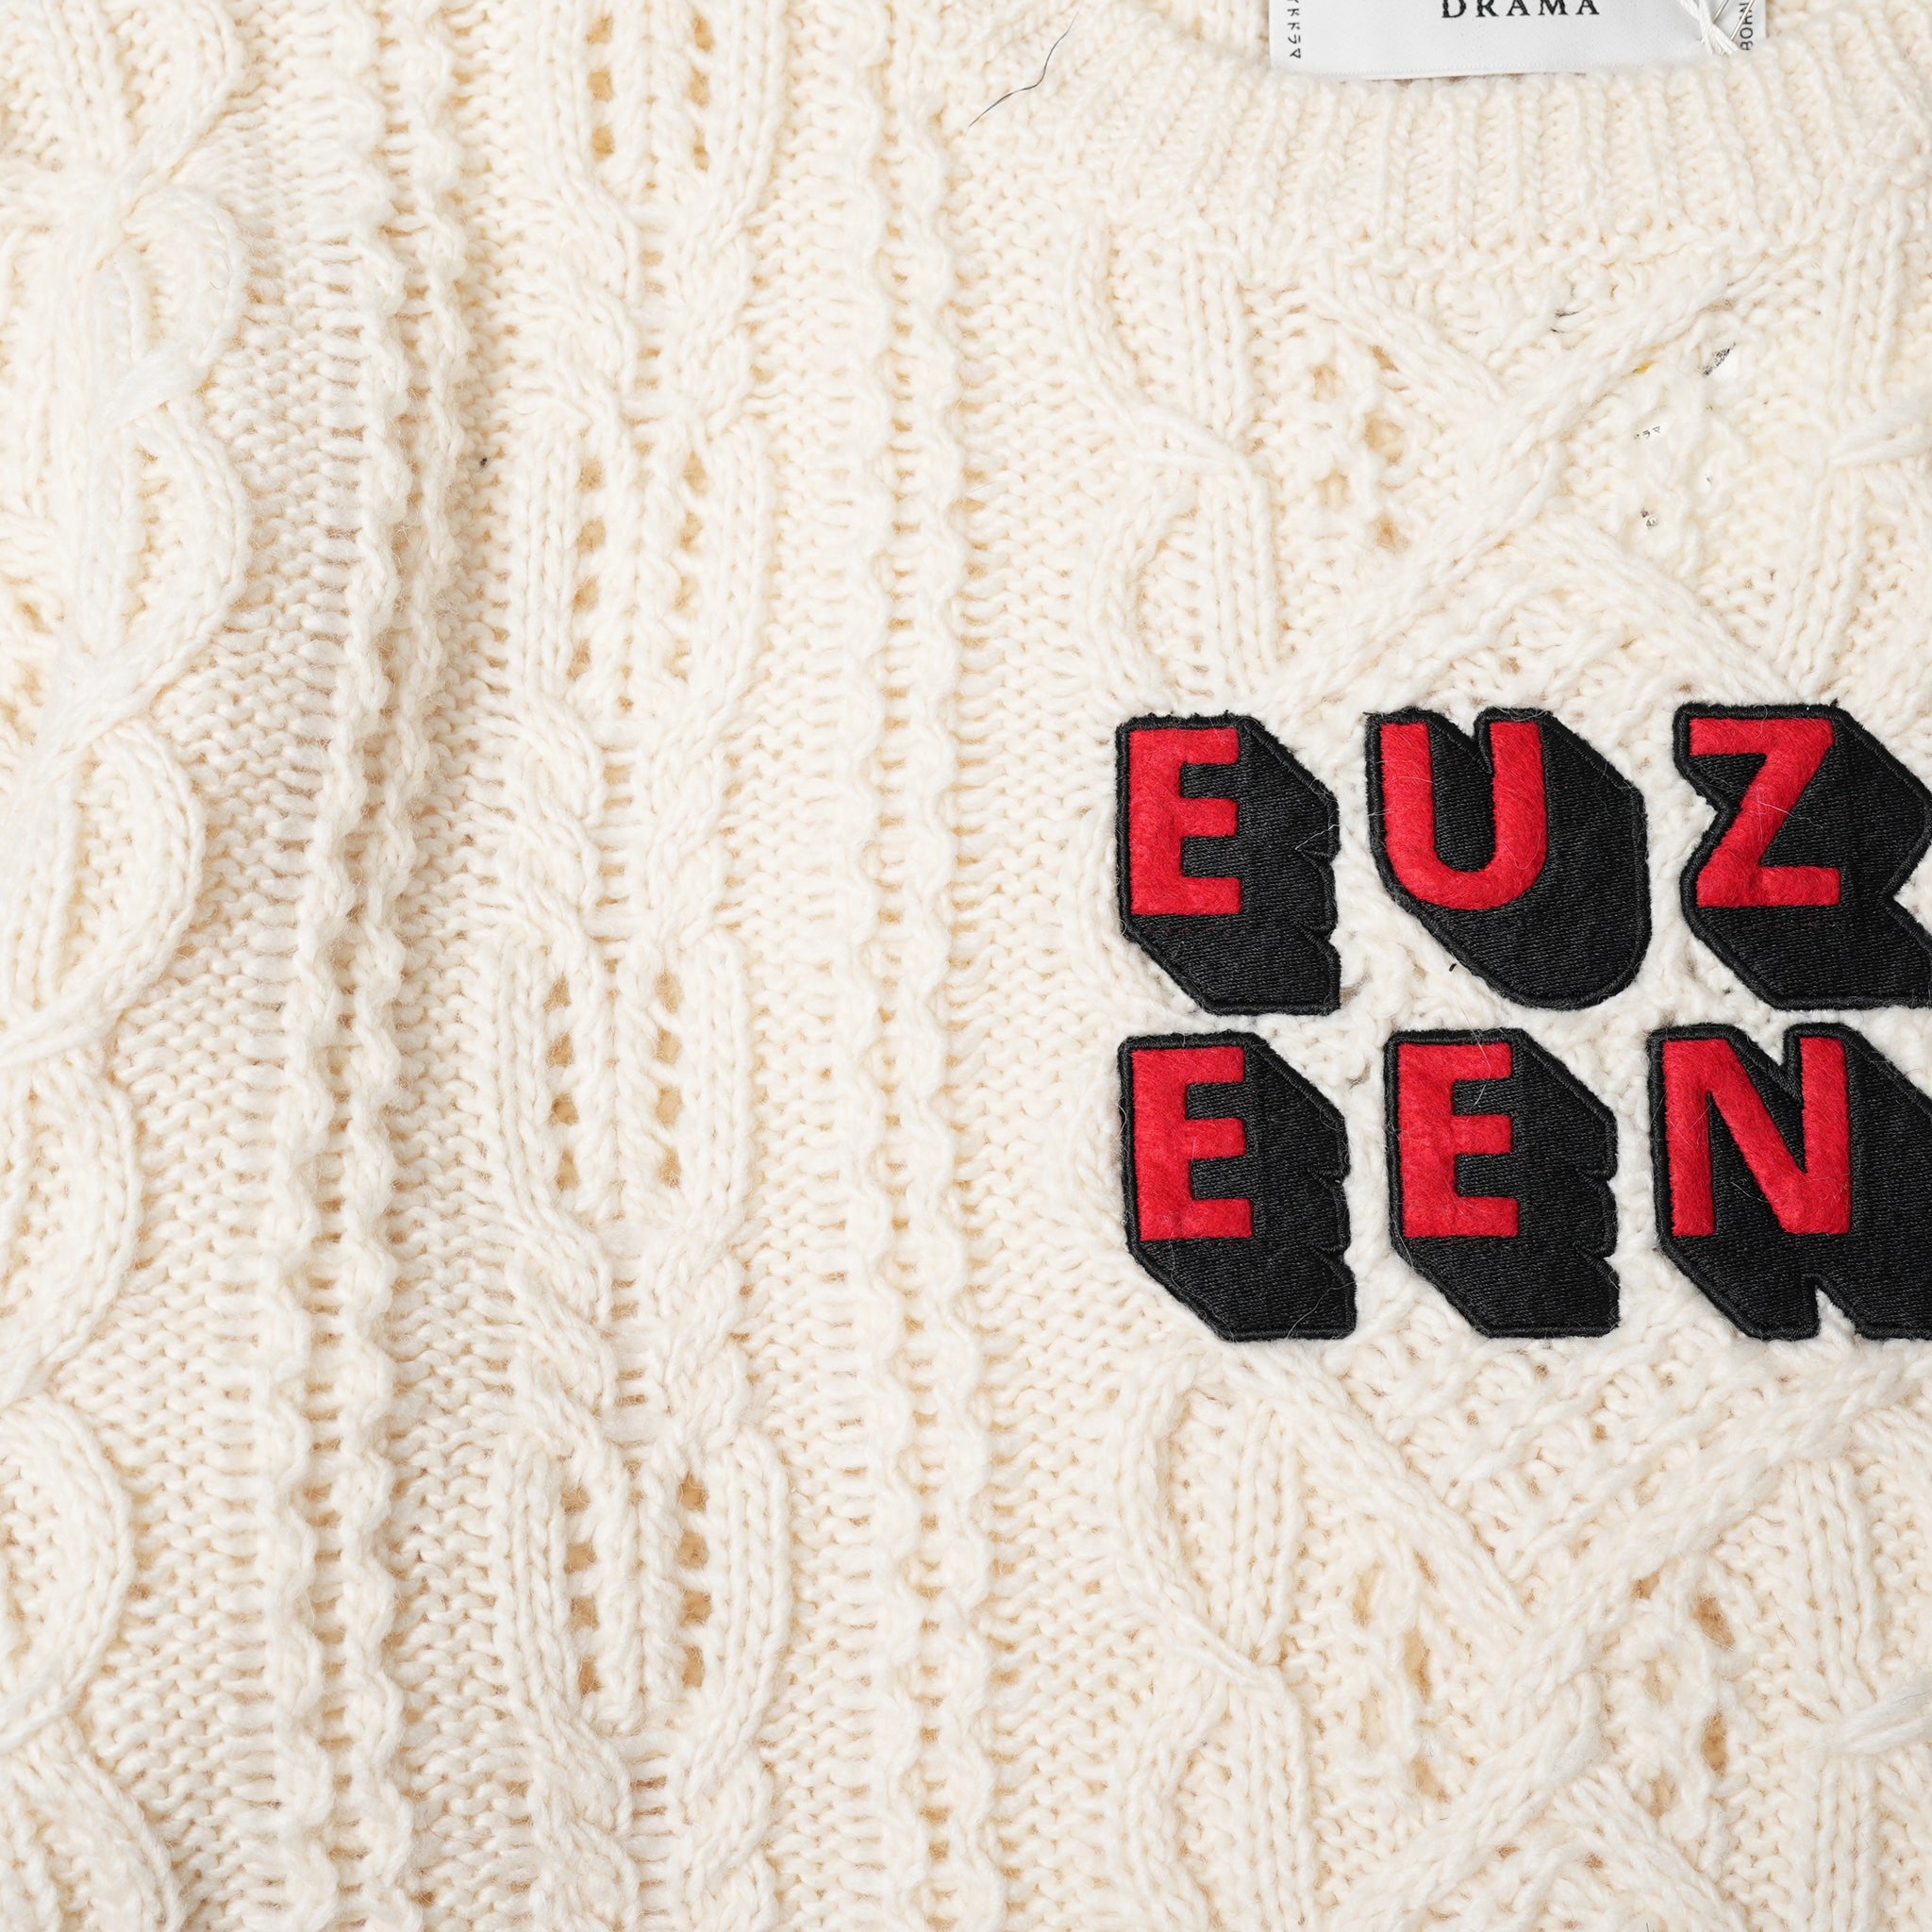 No:bsd23AW-16 | Name:EUZEEN Mix Knit Sweater | Color:Off White【BEDSIDEDRAMA_ベッドサイドドラマ】